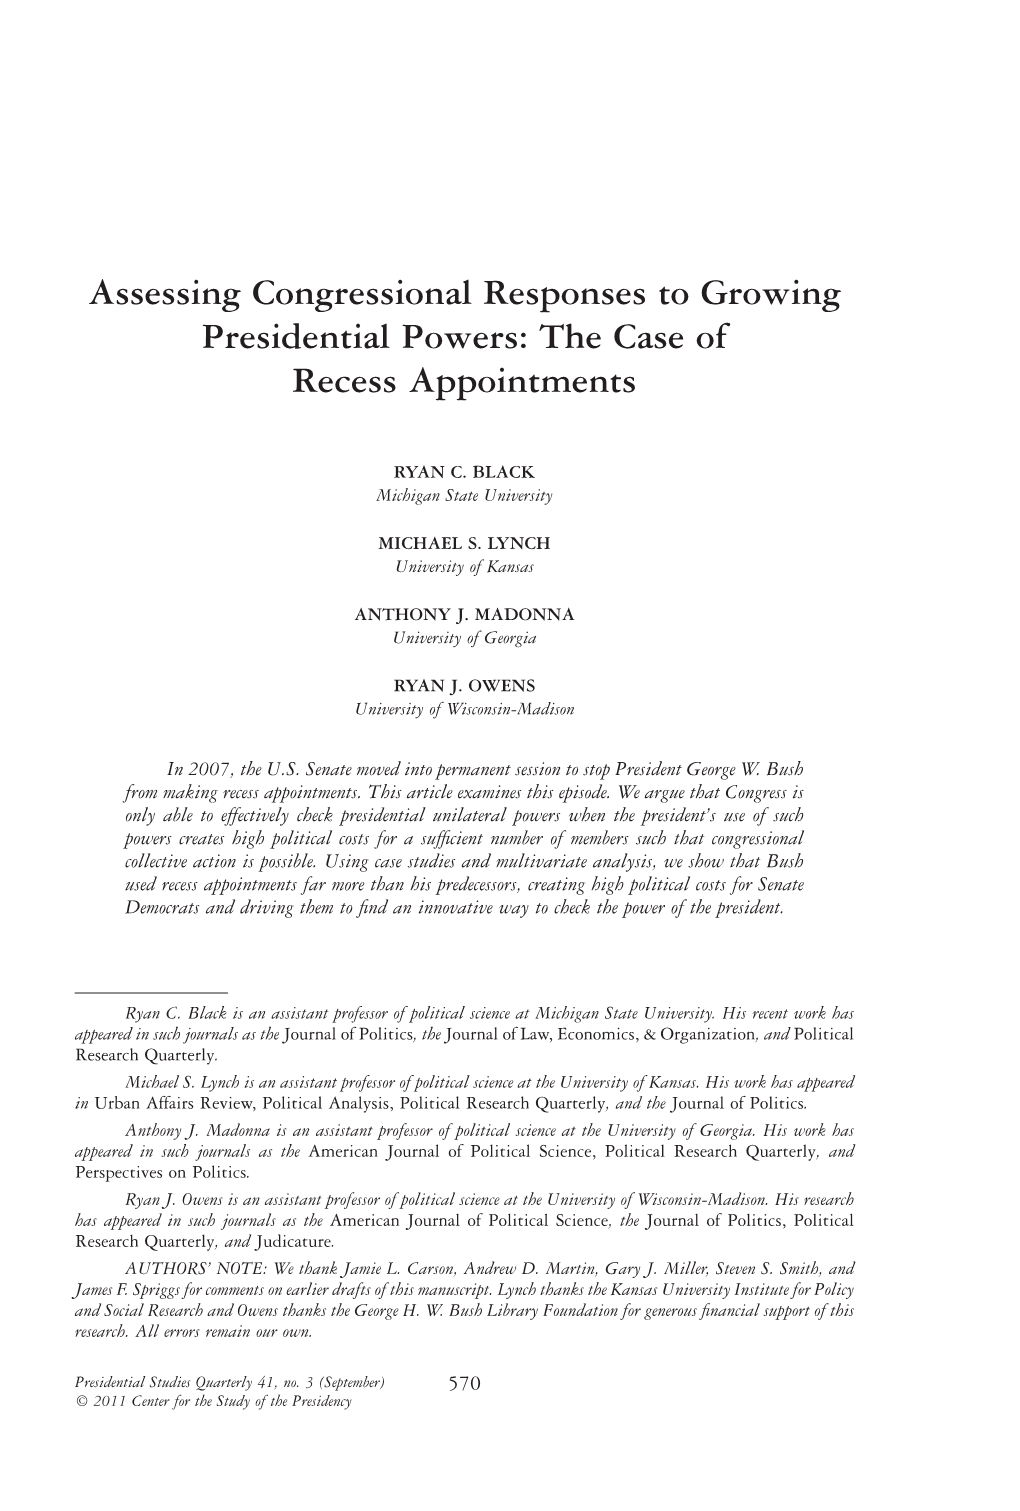 Assessing Congressional Responses to Growing Presidential Powers: the Case of Recess Appointments